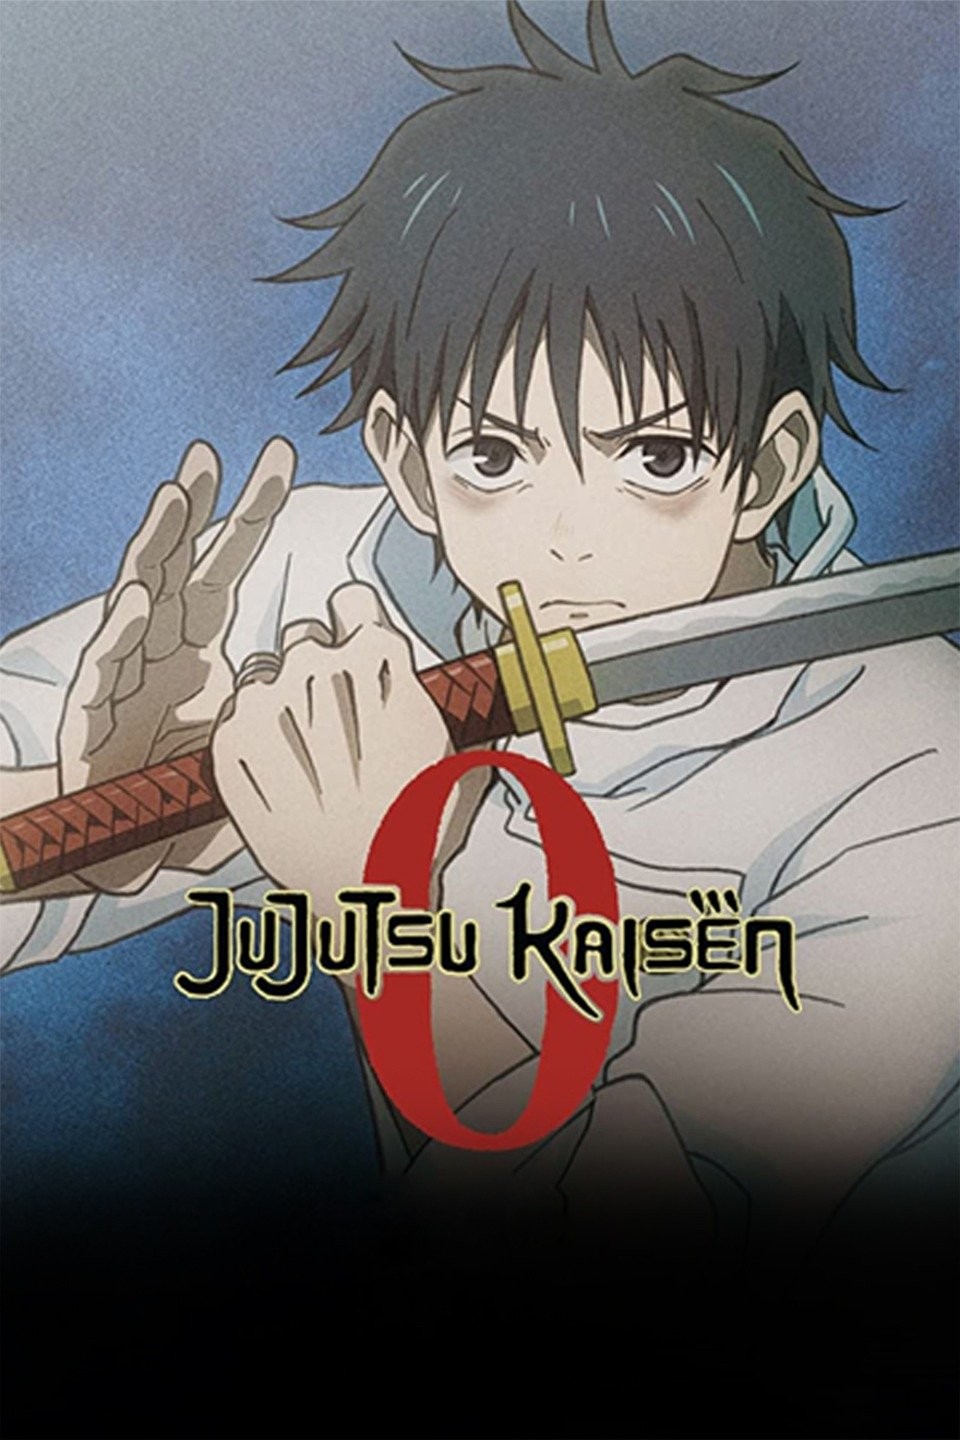 Jujutsu Kaisen 0 is Now the 10th Highest-Grossing Anime Movie of All Time